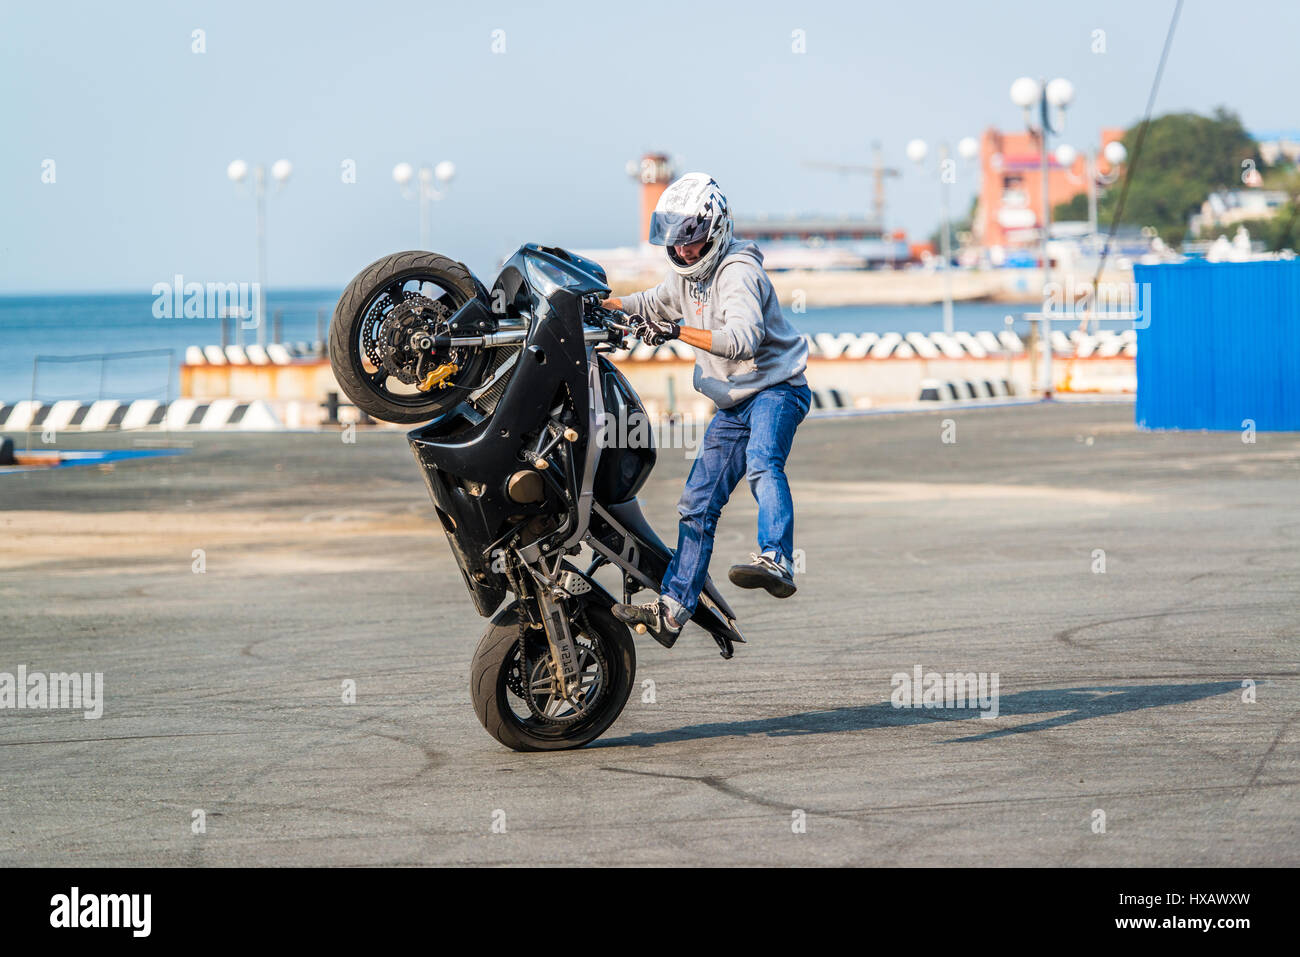 VLADIVOSTOK, RUSSIE - 05 octobre 2013 : Stunt pilote moto performing at a local motorcycle show. Banque D'Images